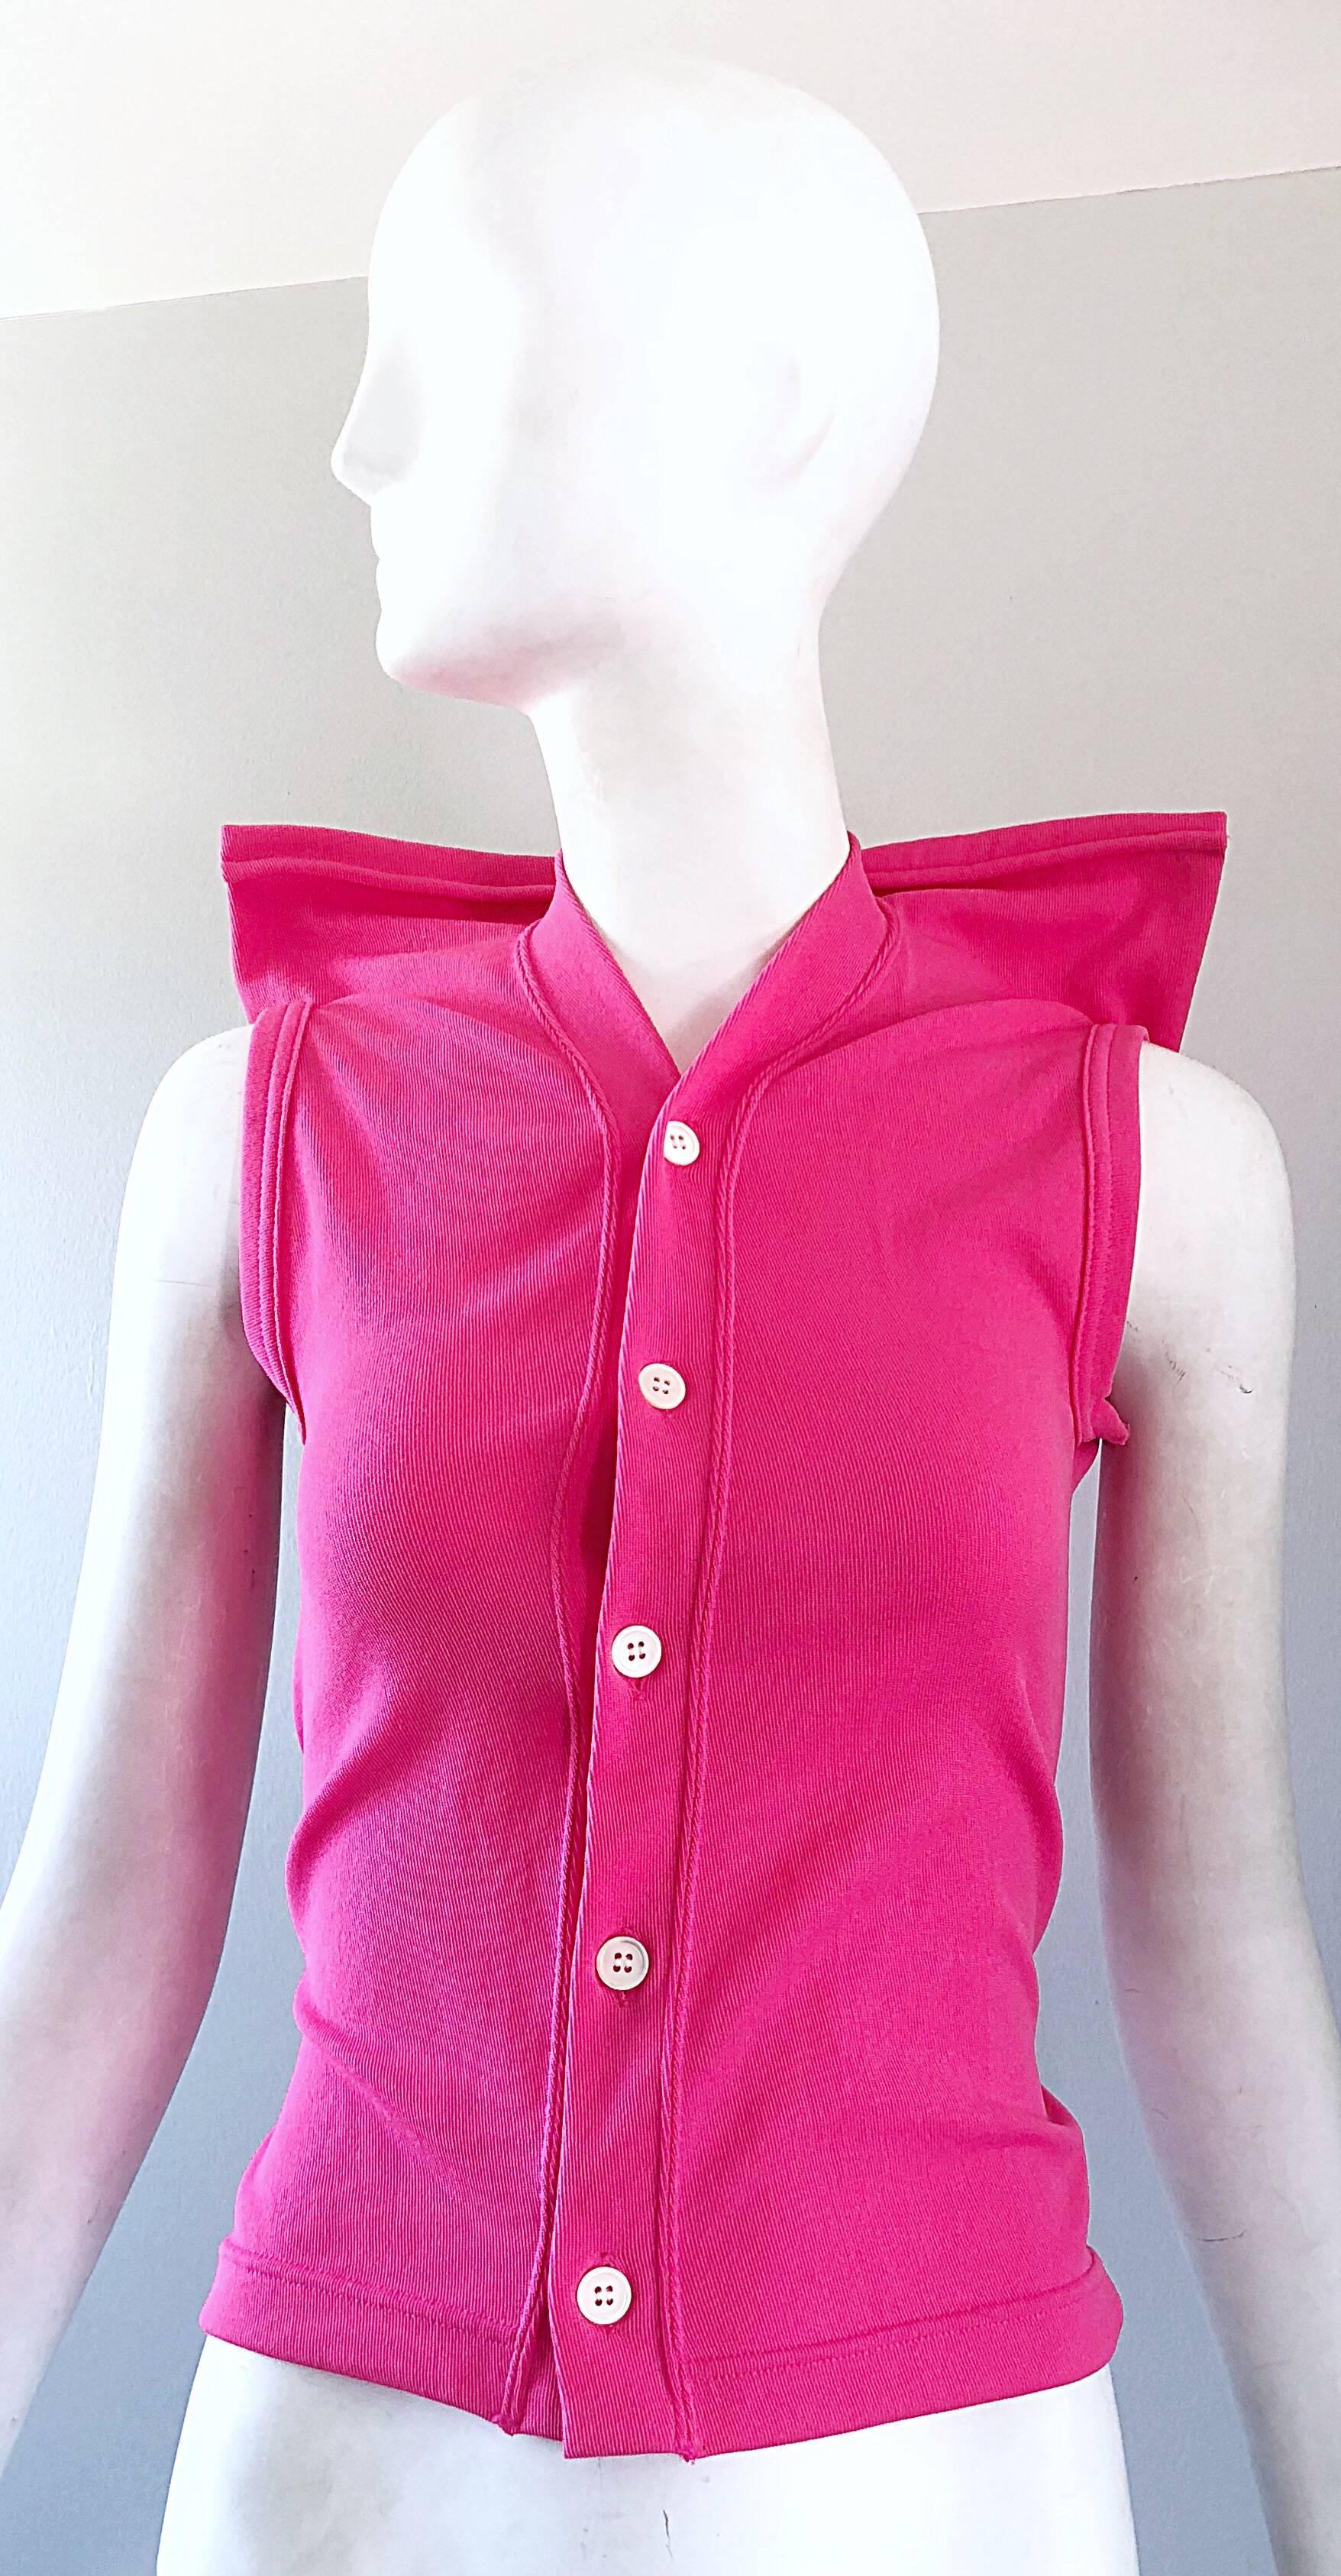 Rare 90s COMME DES GARCONS hot pink futuristic Avant Garde sleeveless knit top! Features raised 'strong shoulders' that add (good) drama to any outfit. Buttons up the front. Great with a skirt, shorts, trousers, or jeans. In great condition. Made in